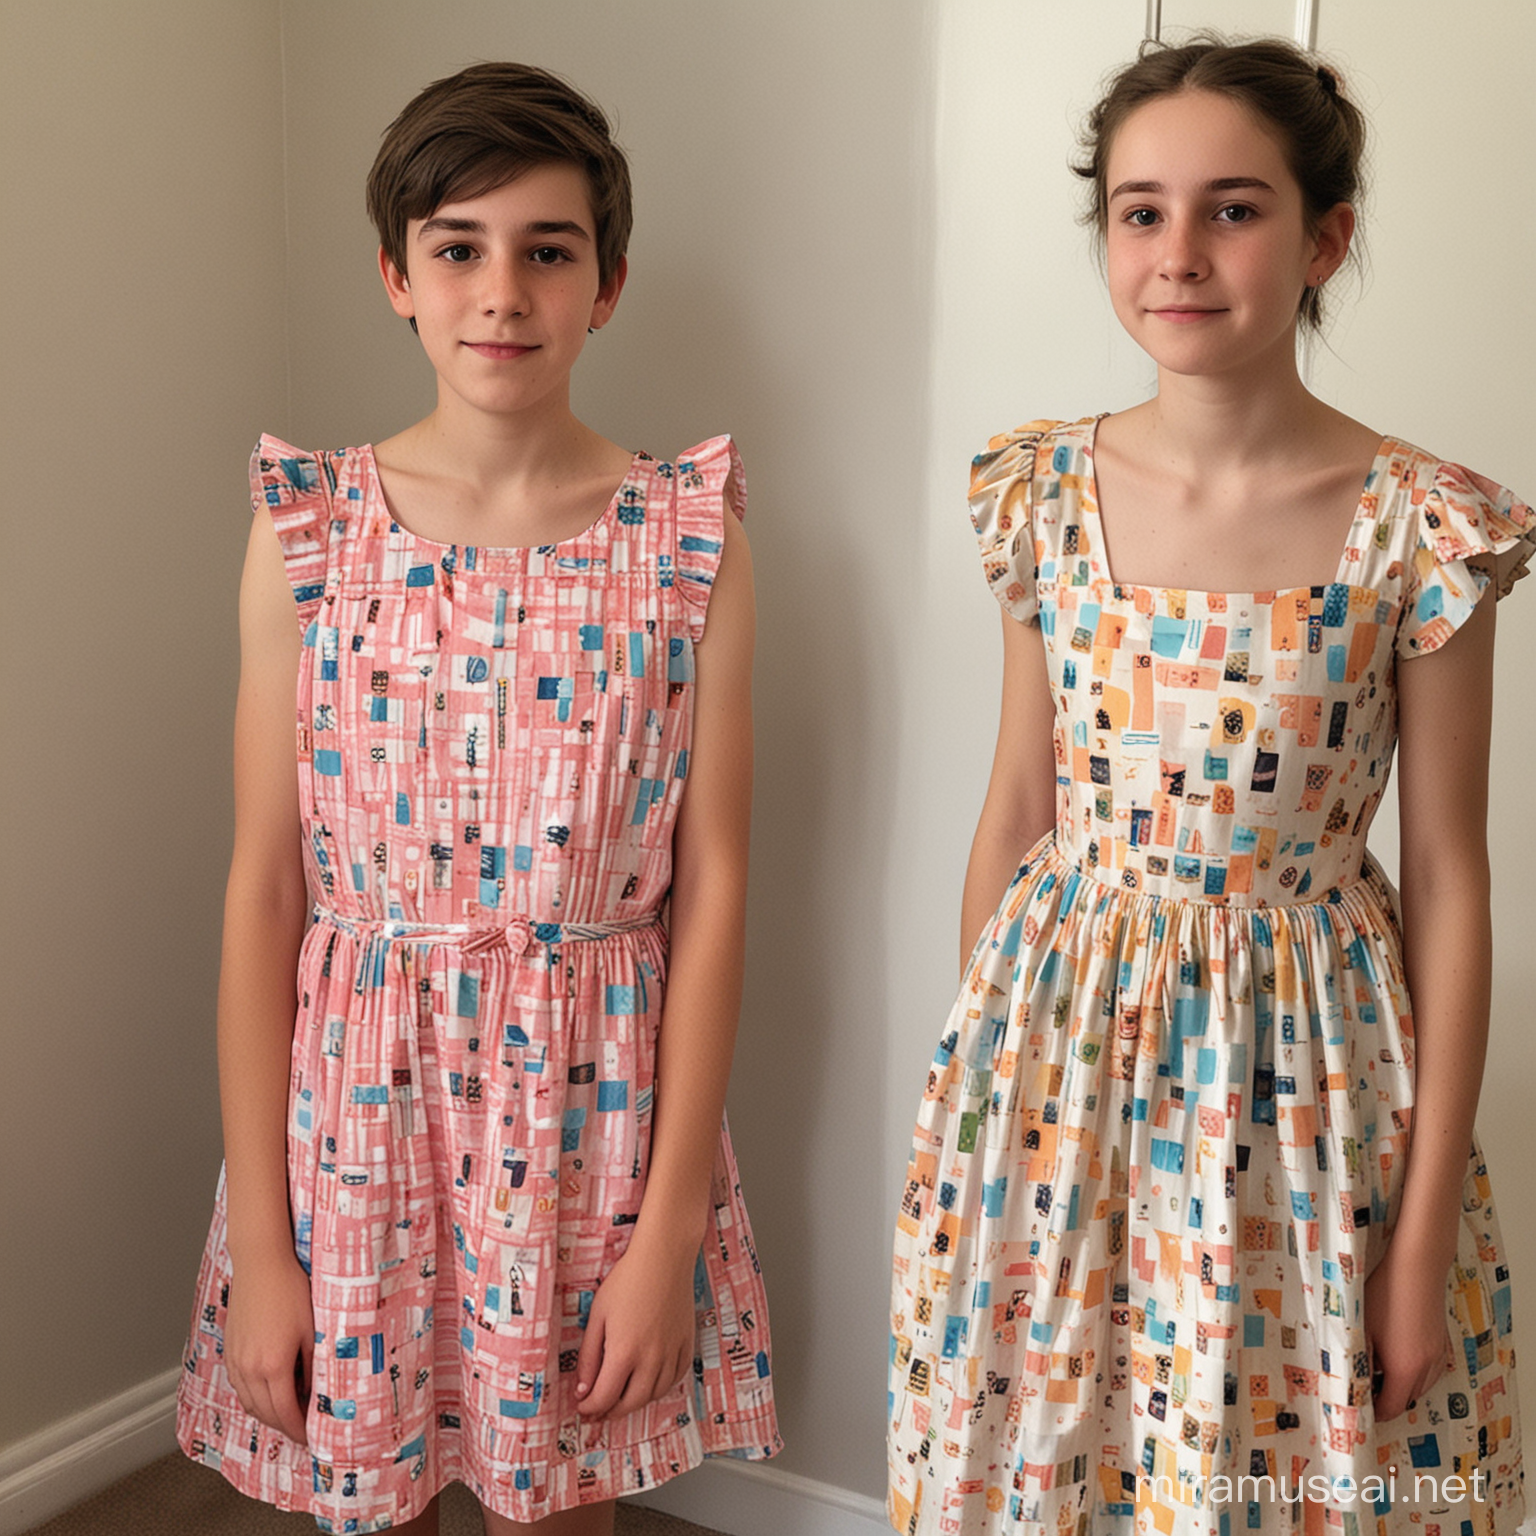 16 year old boy has to wear a dress as a gift for his sister's birthday